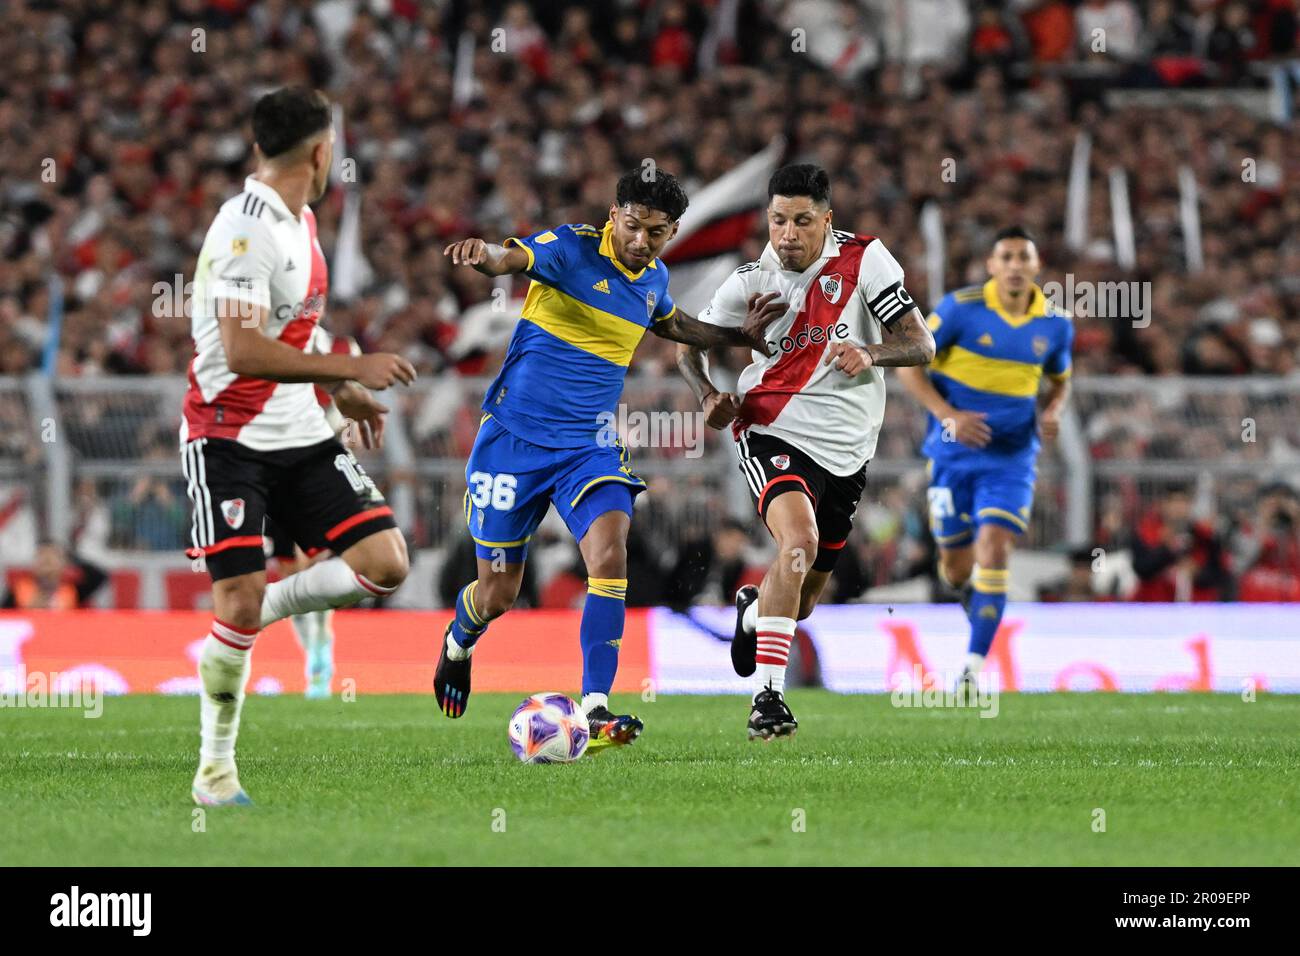 Buenos Aires, Argentina. 07th May, 2023. Monumental de Nunez Stadium Enzo Perez of River Plate competes with Cristian Medina of Boca Juniors, during the match between River Plate and Boca Juniors, for the 15th round of the 2023 Argentine Championship, at the Monumental de Nunez Stadium this Sunday, 07. 30761 (Luciano Bisbal/SPP) Credit: SPP Sport Press Photo. /Alamy Live News Stock Photo